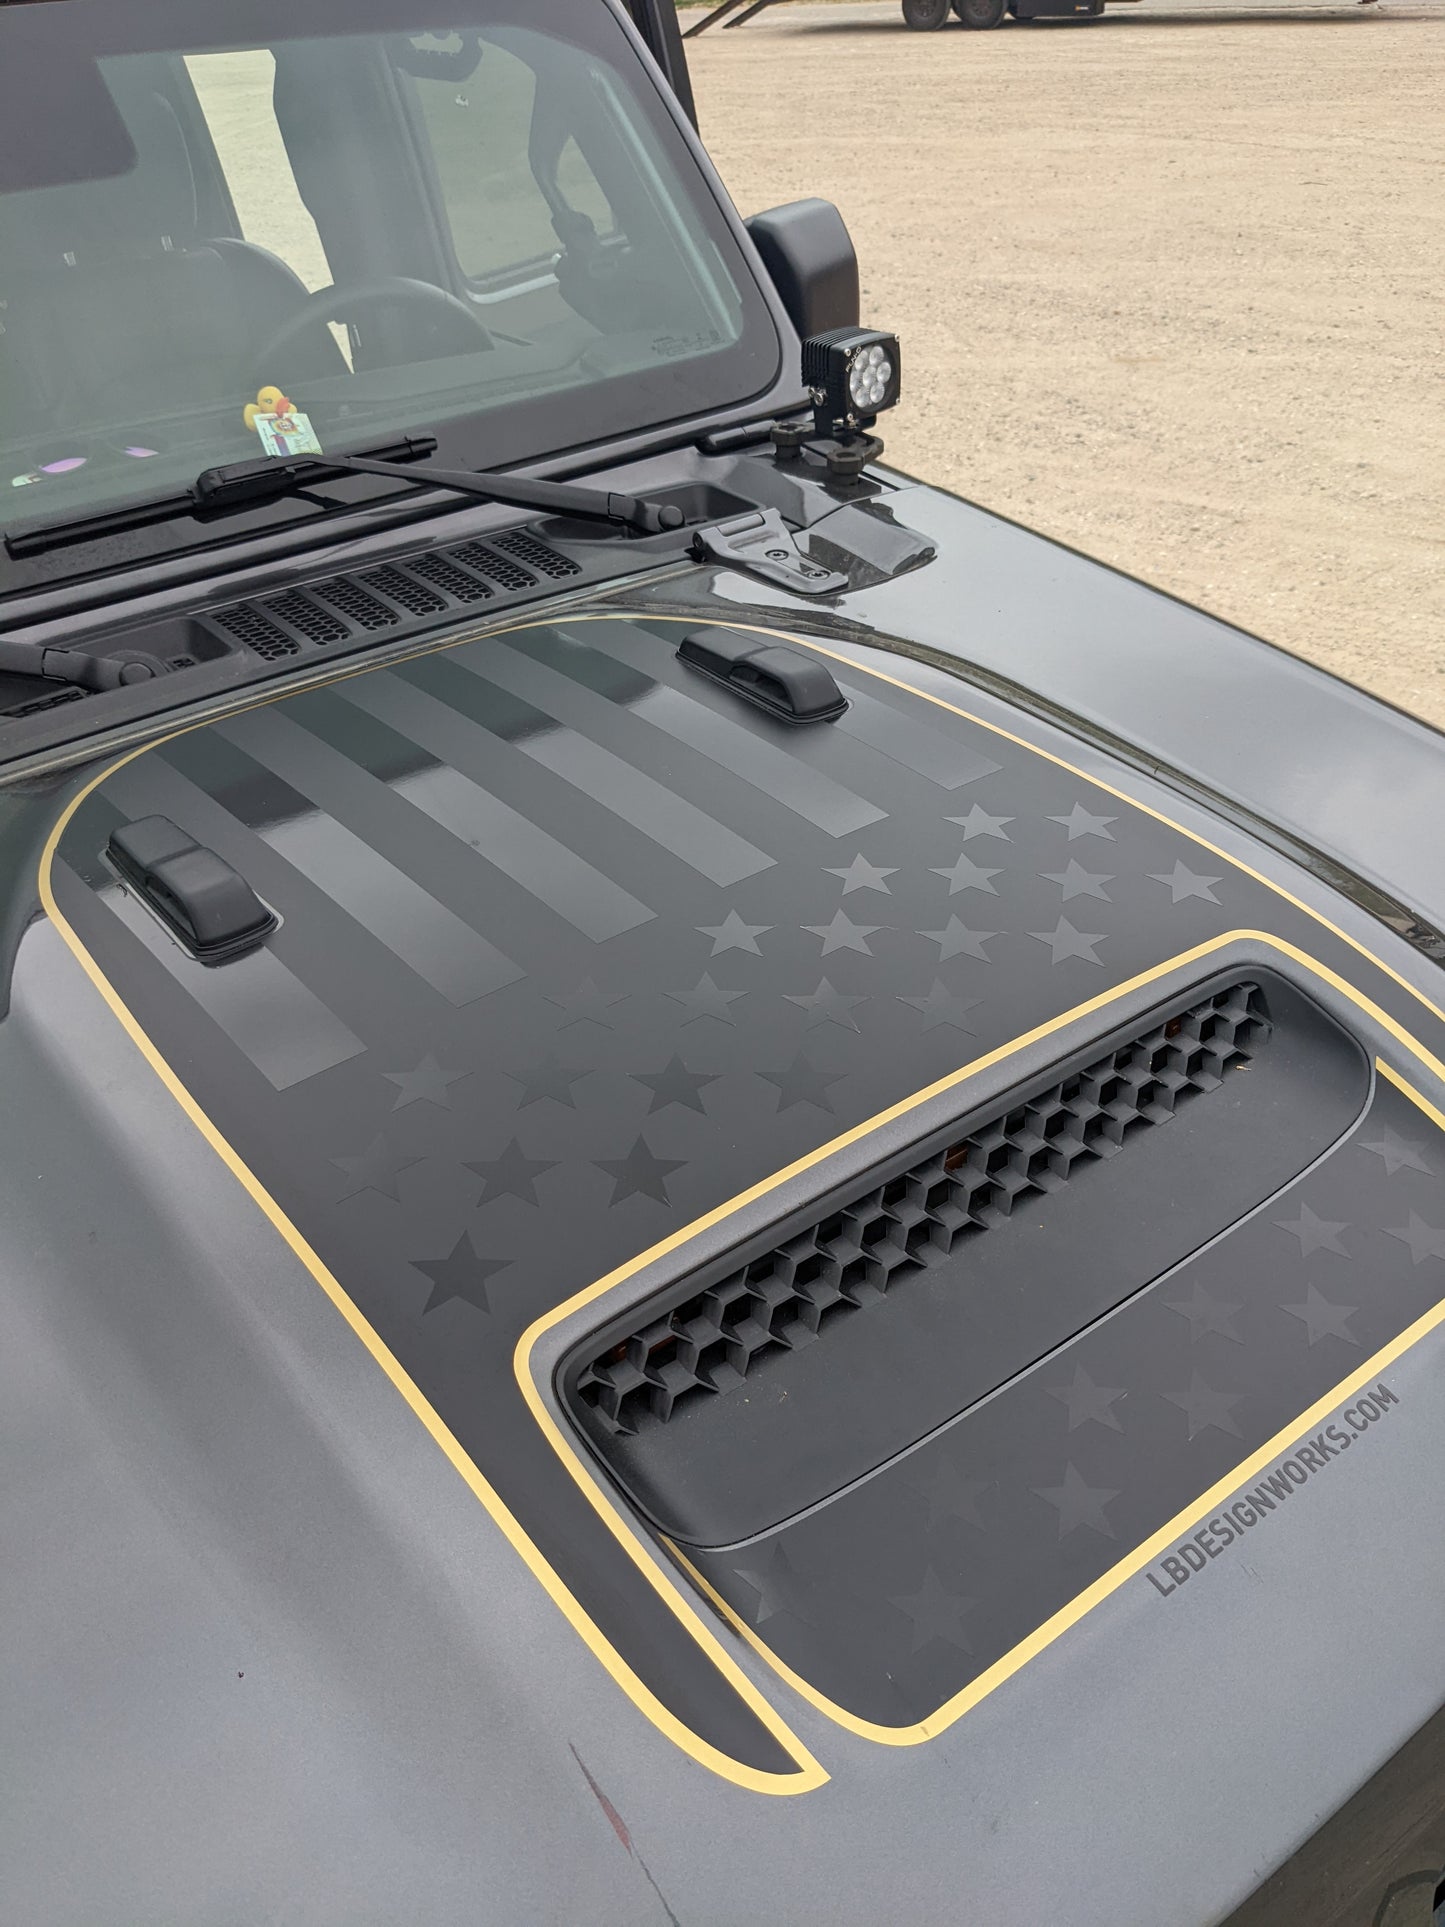 392/Mojave USA American Flag Accent Line Rubicon Blackout Hood Decal- Fits Jeep Wrangler 392 & Gladiator Mojave Hood Decal (3 Pieces)